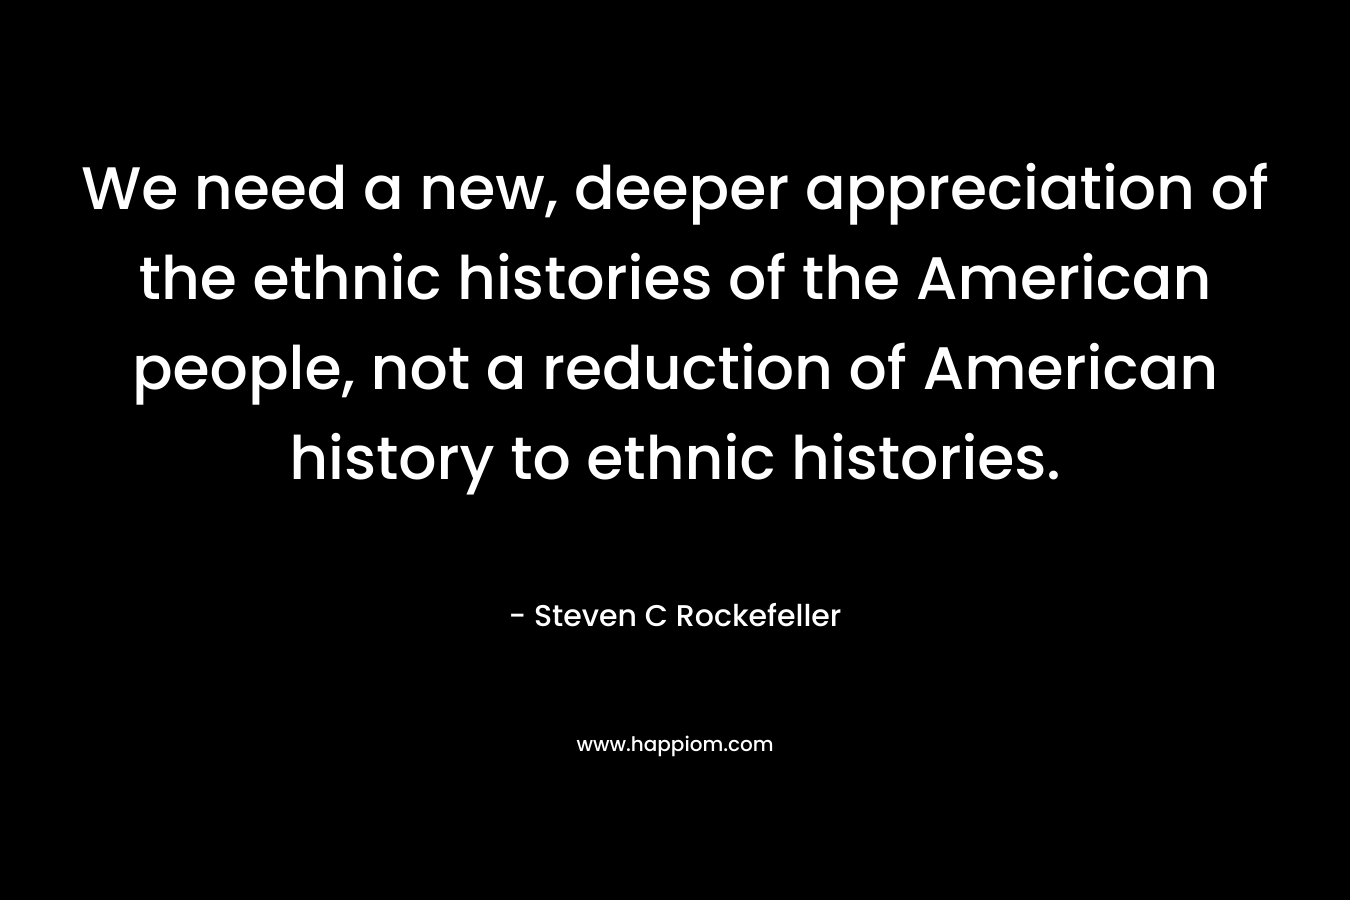 We need a new, deeper appreciation of the ethnic histories of the American people, not a reduction of American history to ethnic histories.